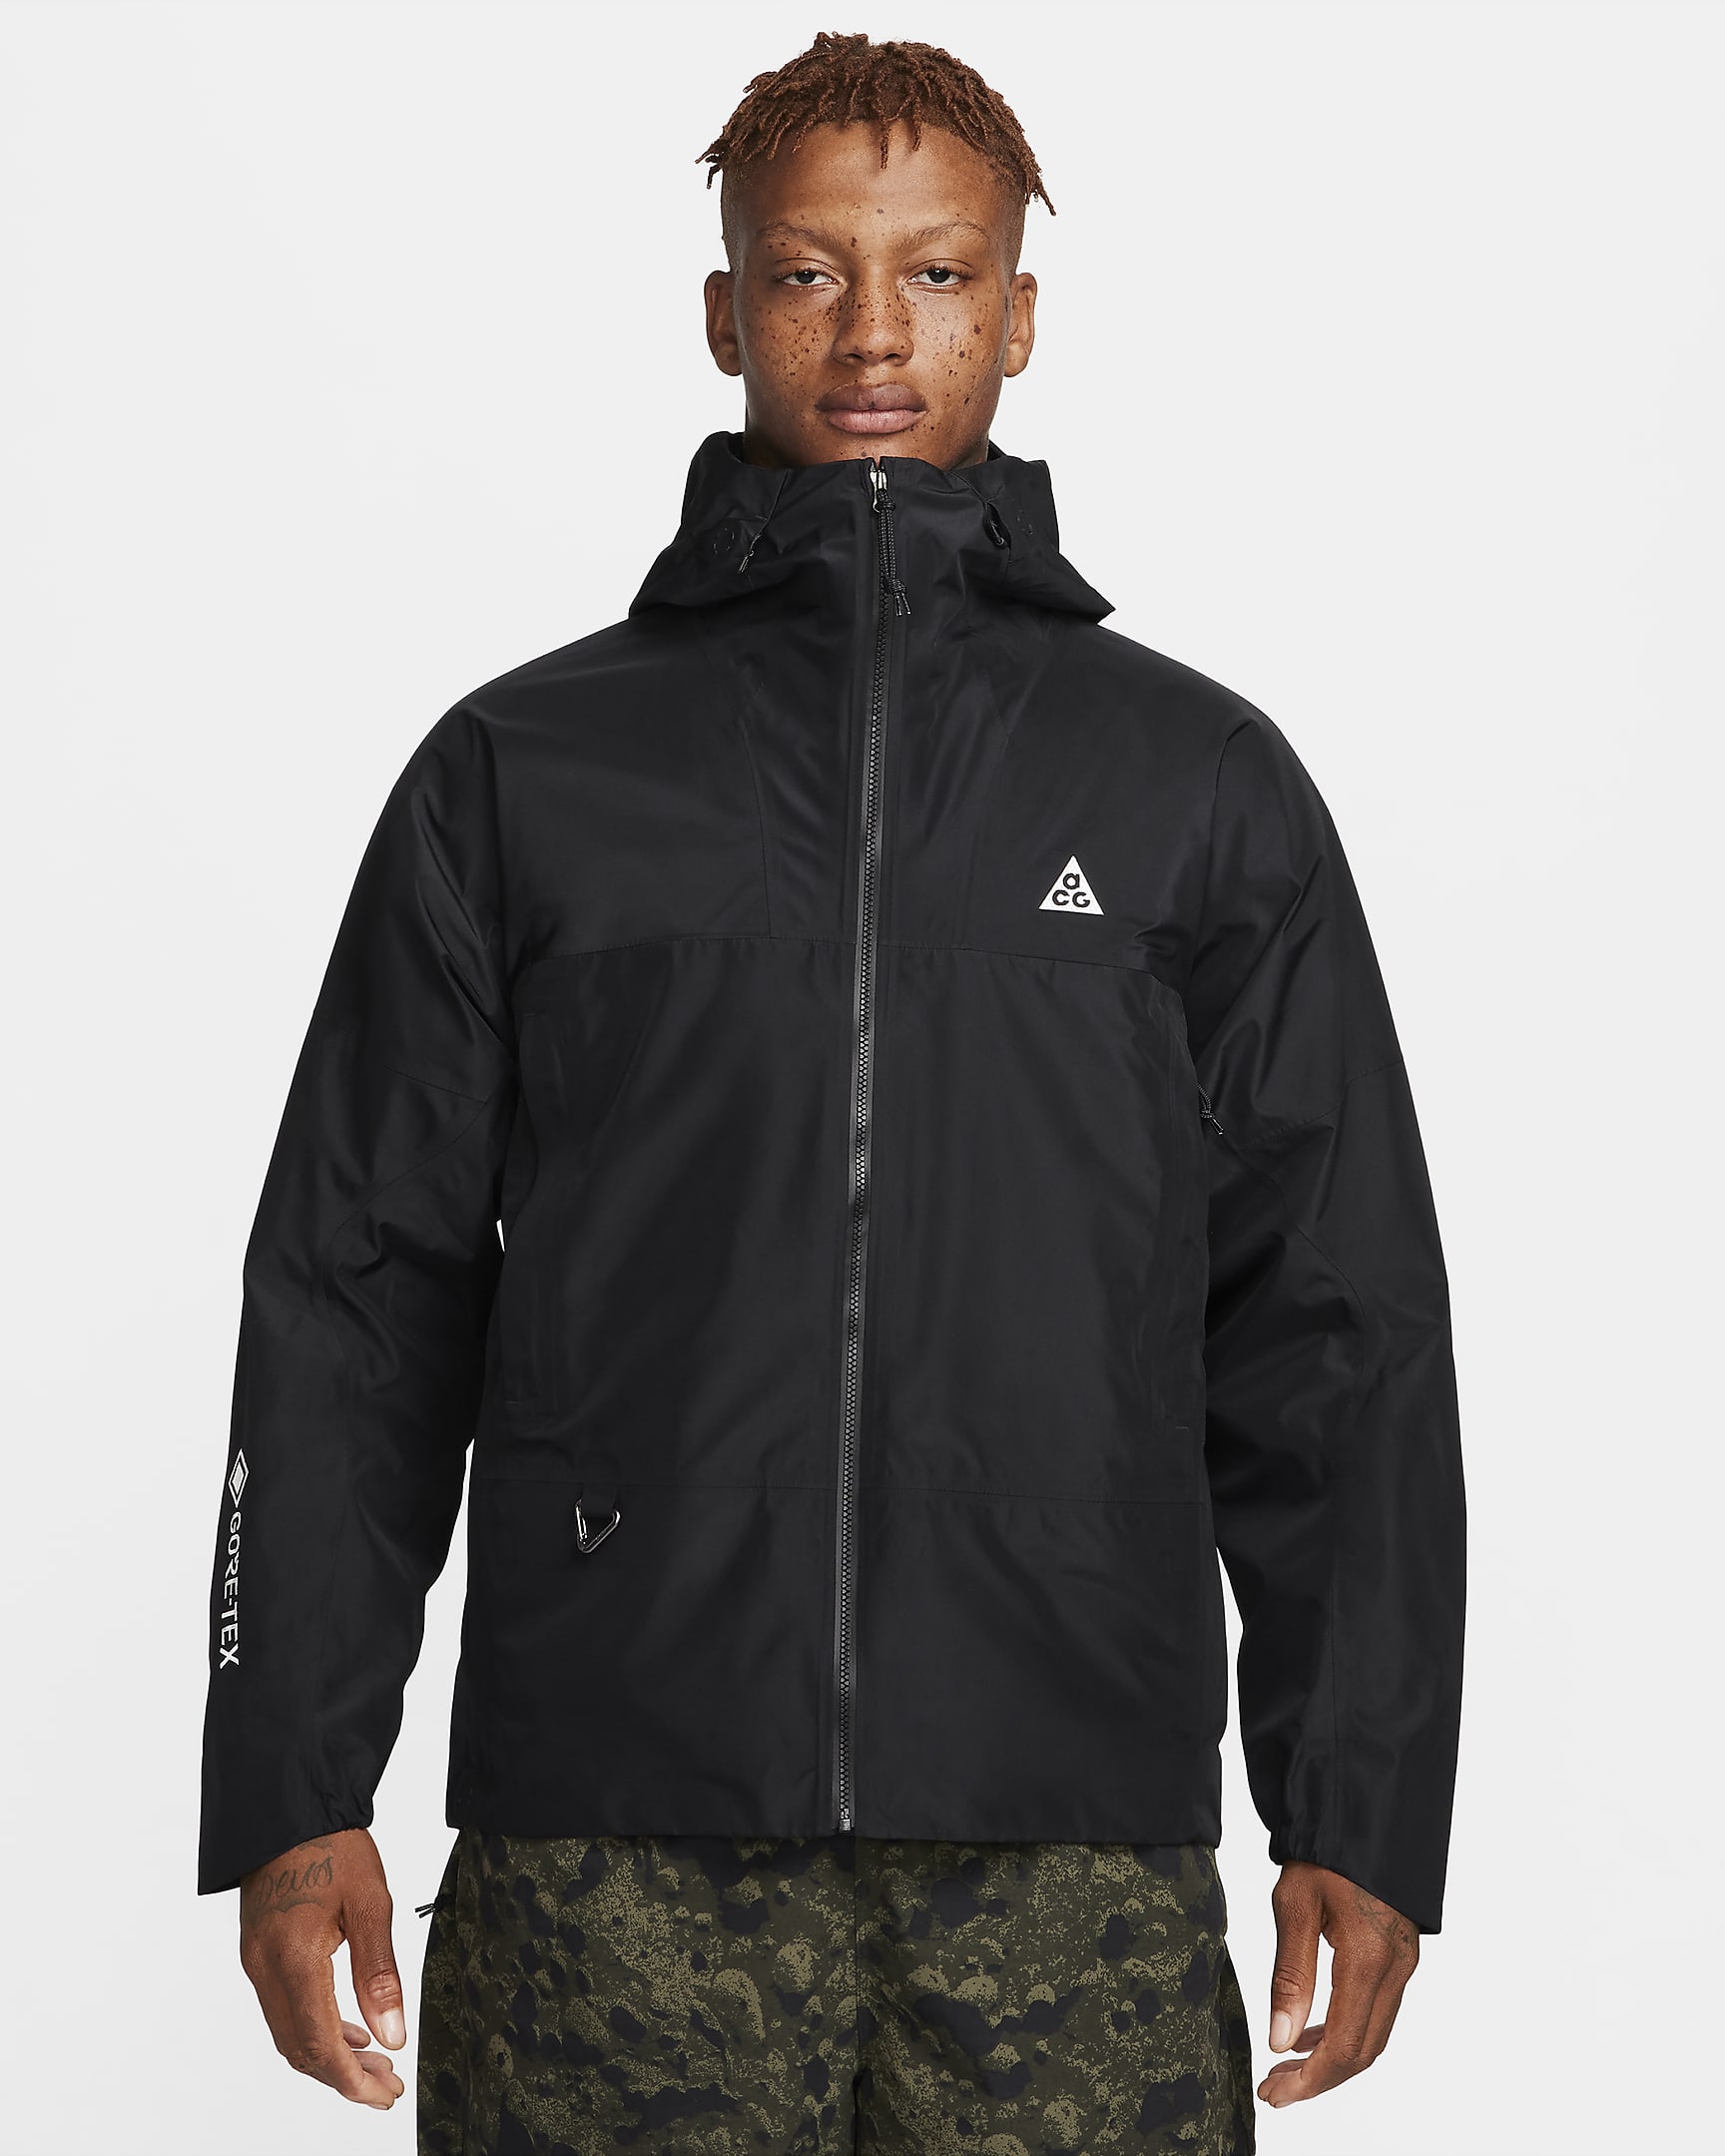 Nike Storm-FIT ADV ACG 'Chain of Craters' Men's Jacket. Nike DK